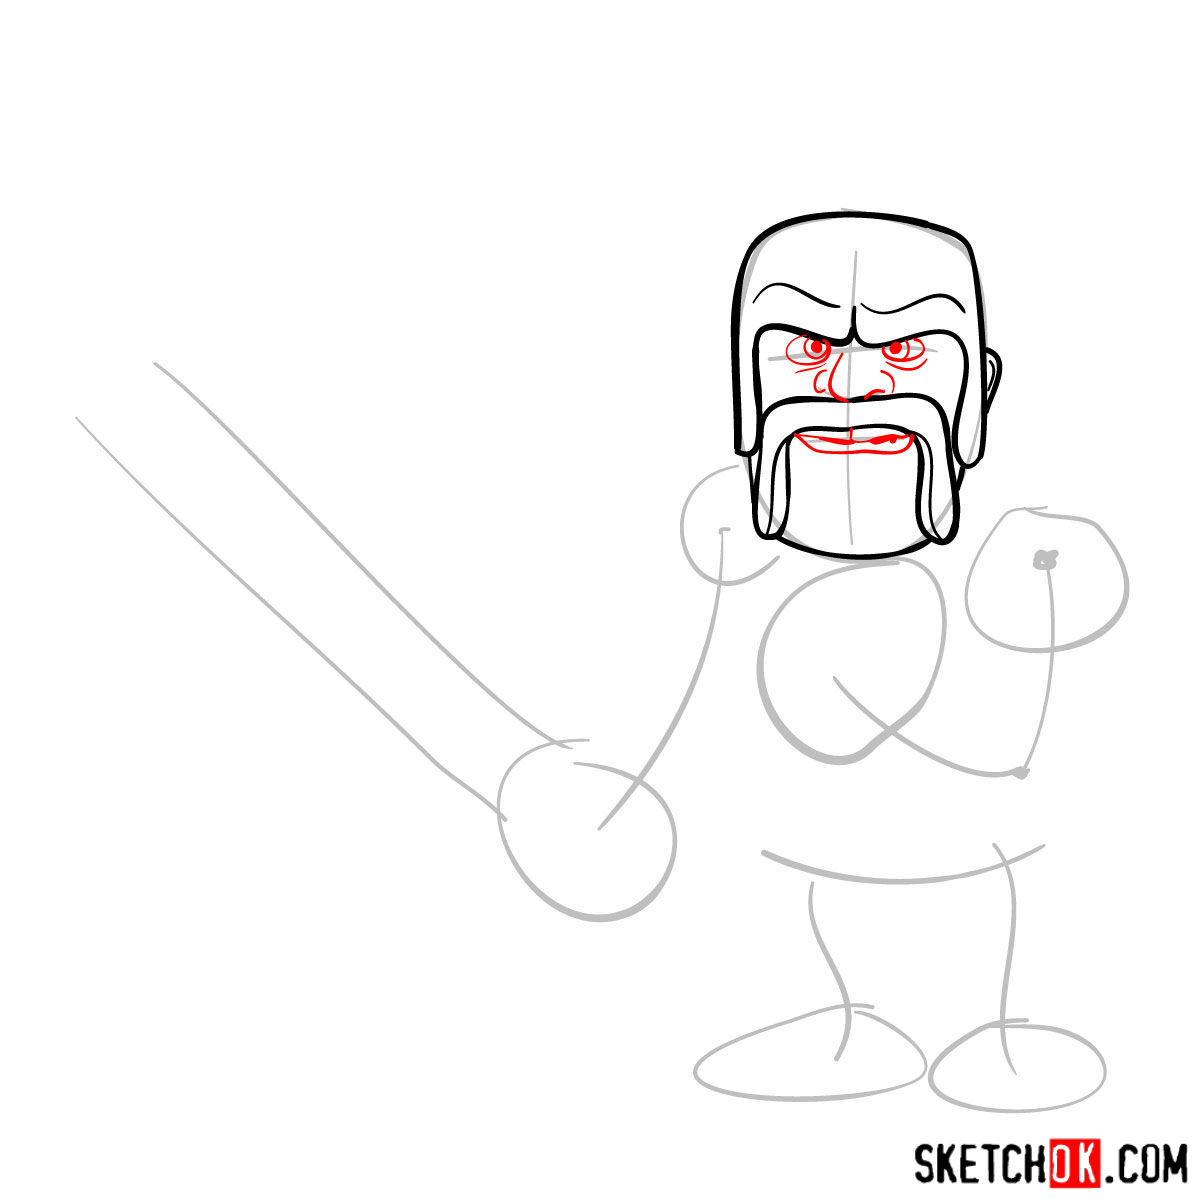 How to draw Barbarian from Clash of Clans - step 04